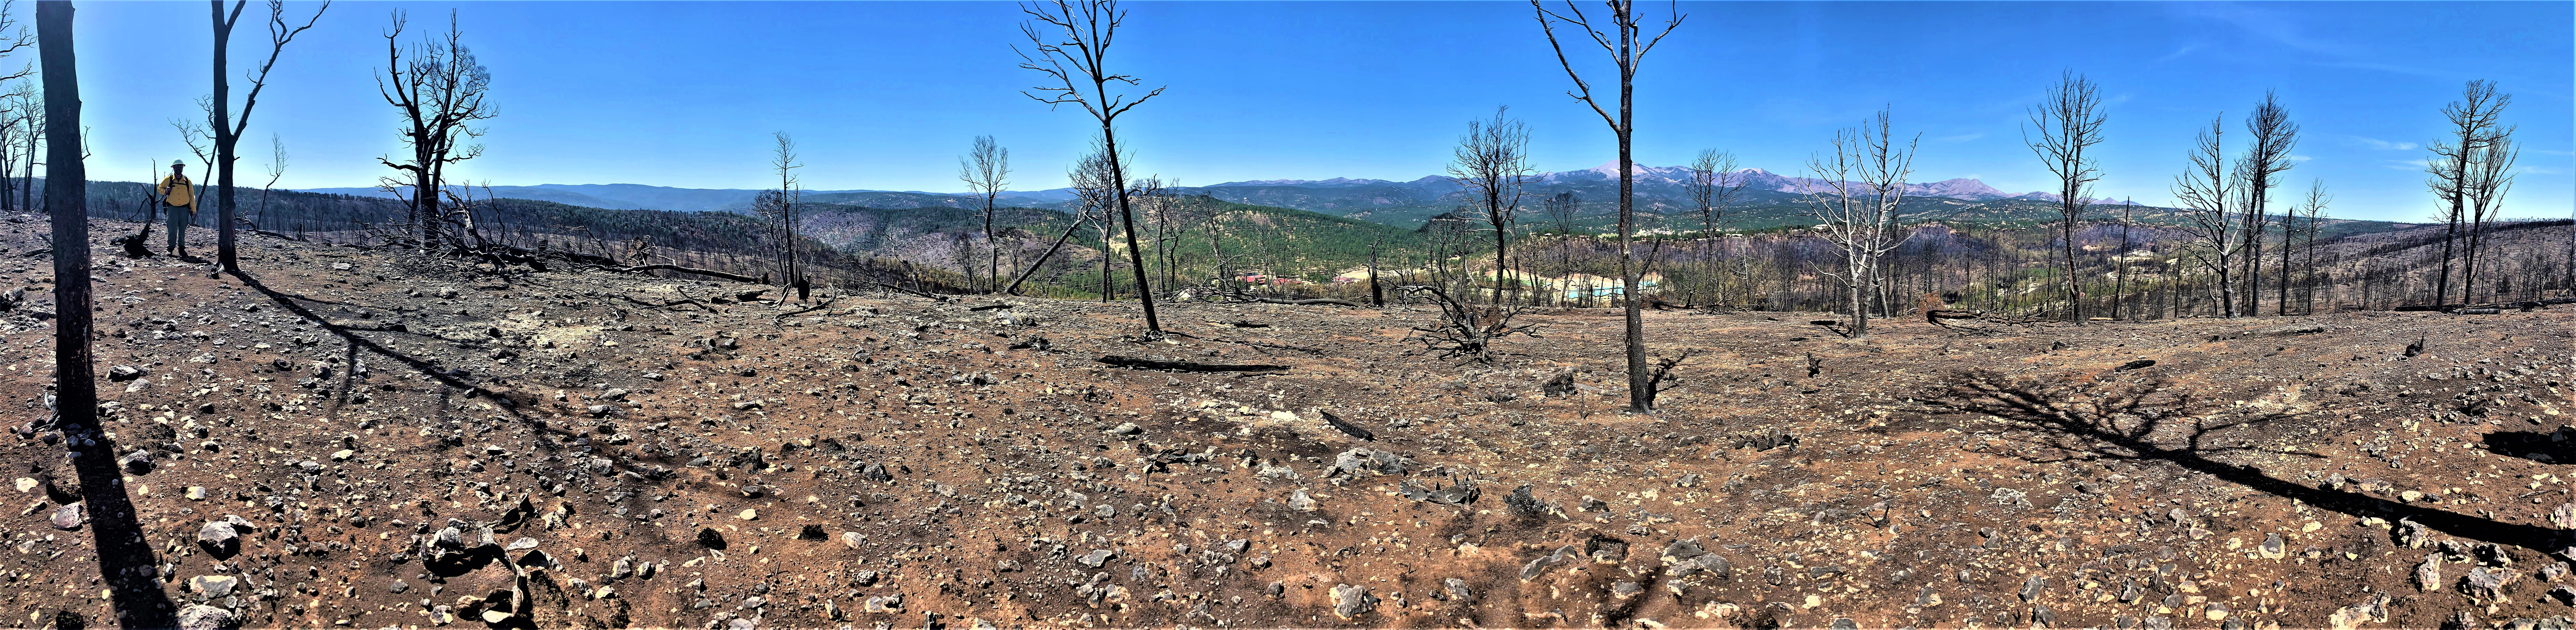 Image showing Panoramic view from a ridge in the McBride Burned Area